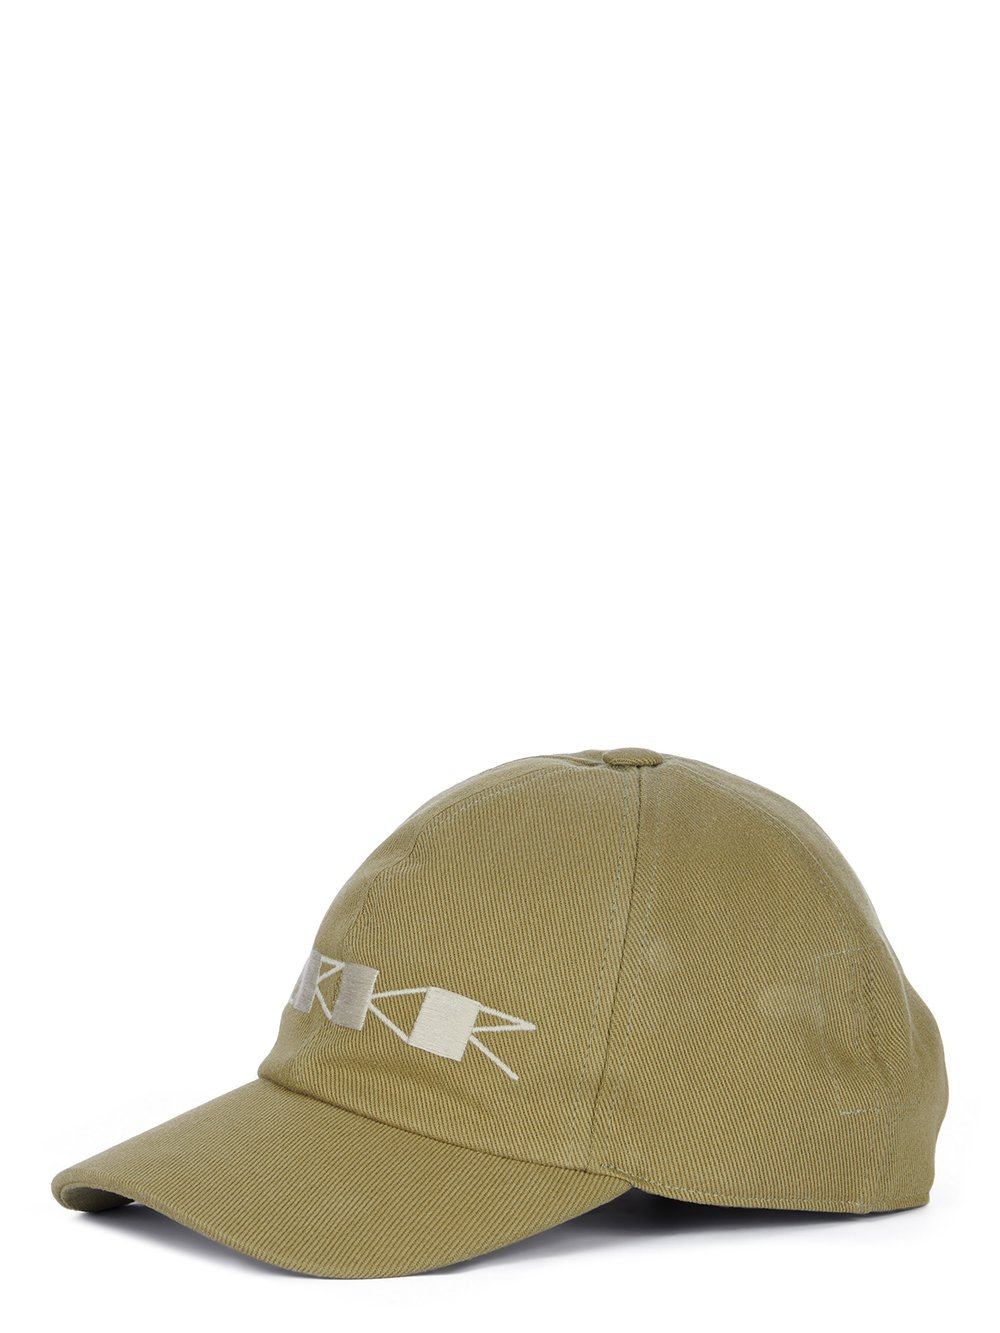 RICK OWENS FW23 LUXOR BASEBALL CAP IN PALE GREEN AND PEARL 13OZ OVERDYED DENIM